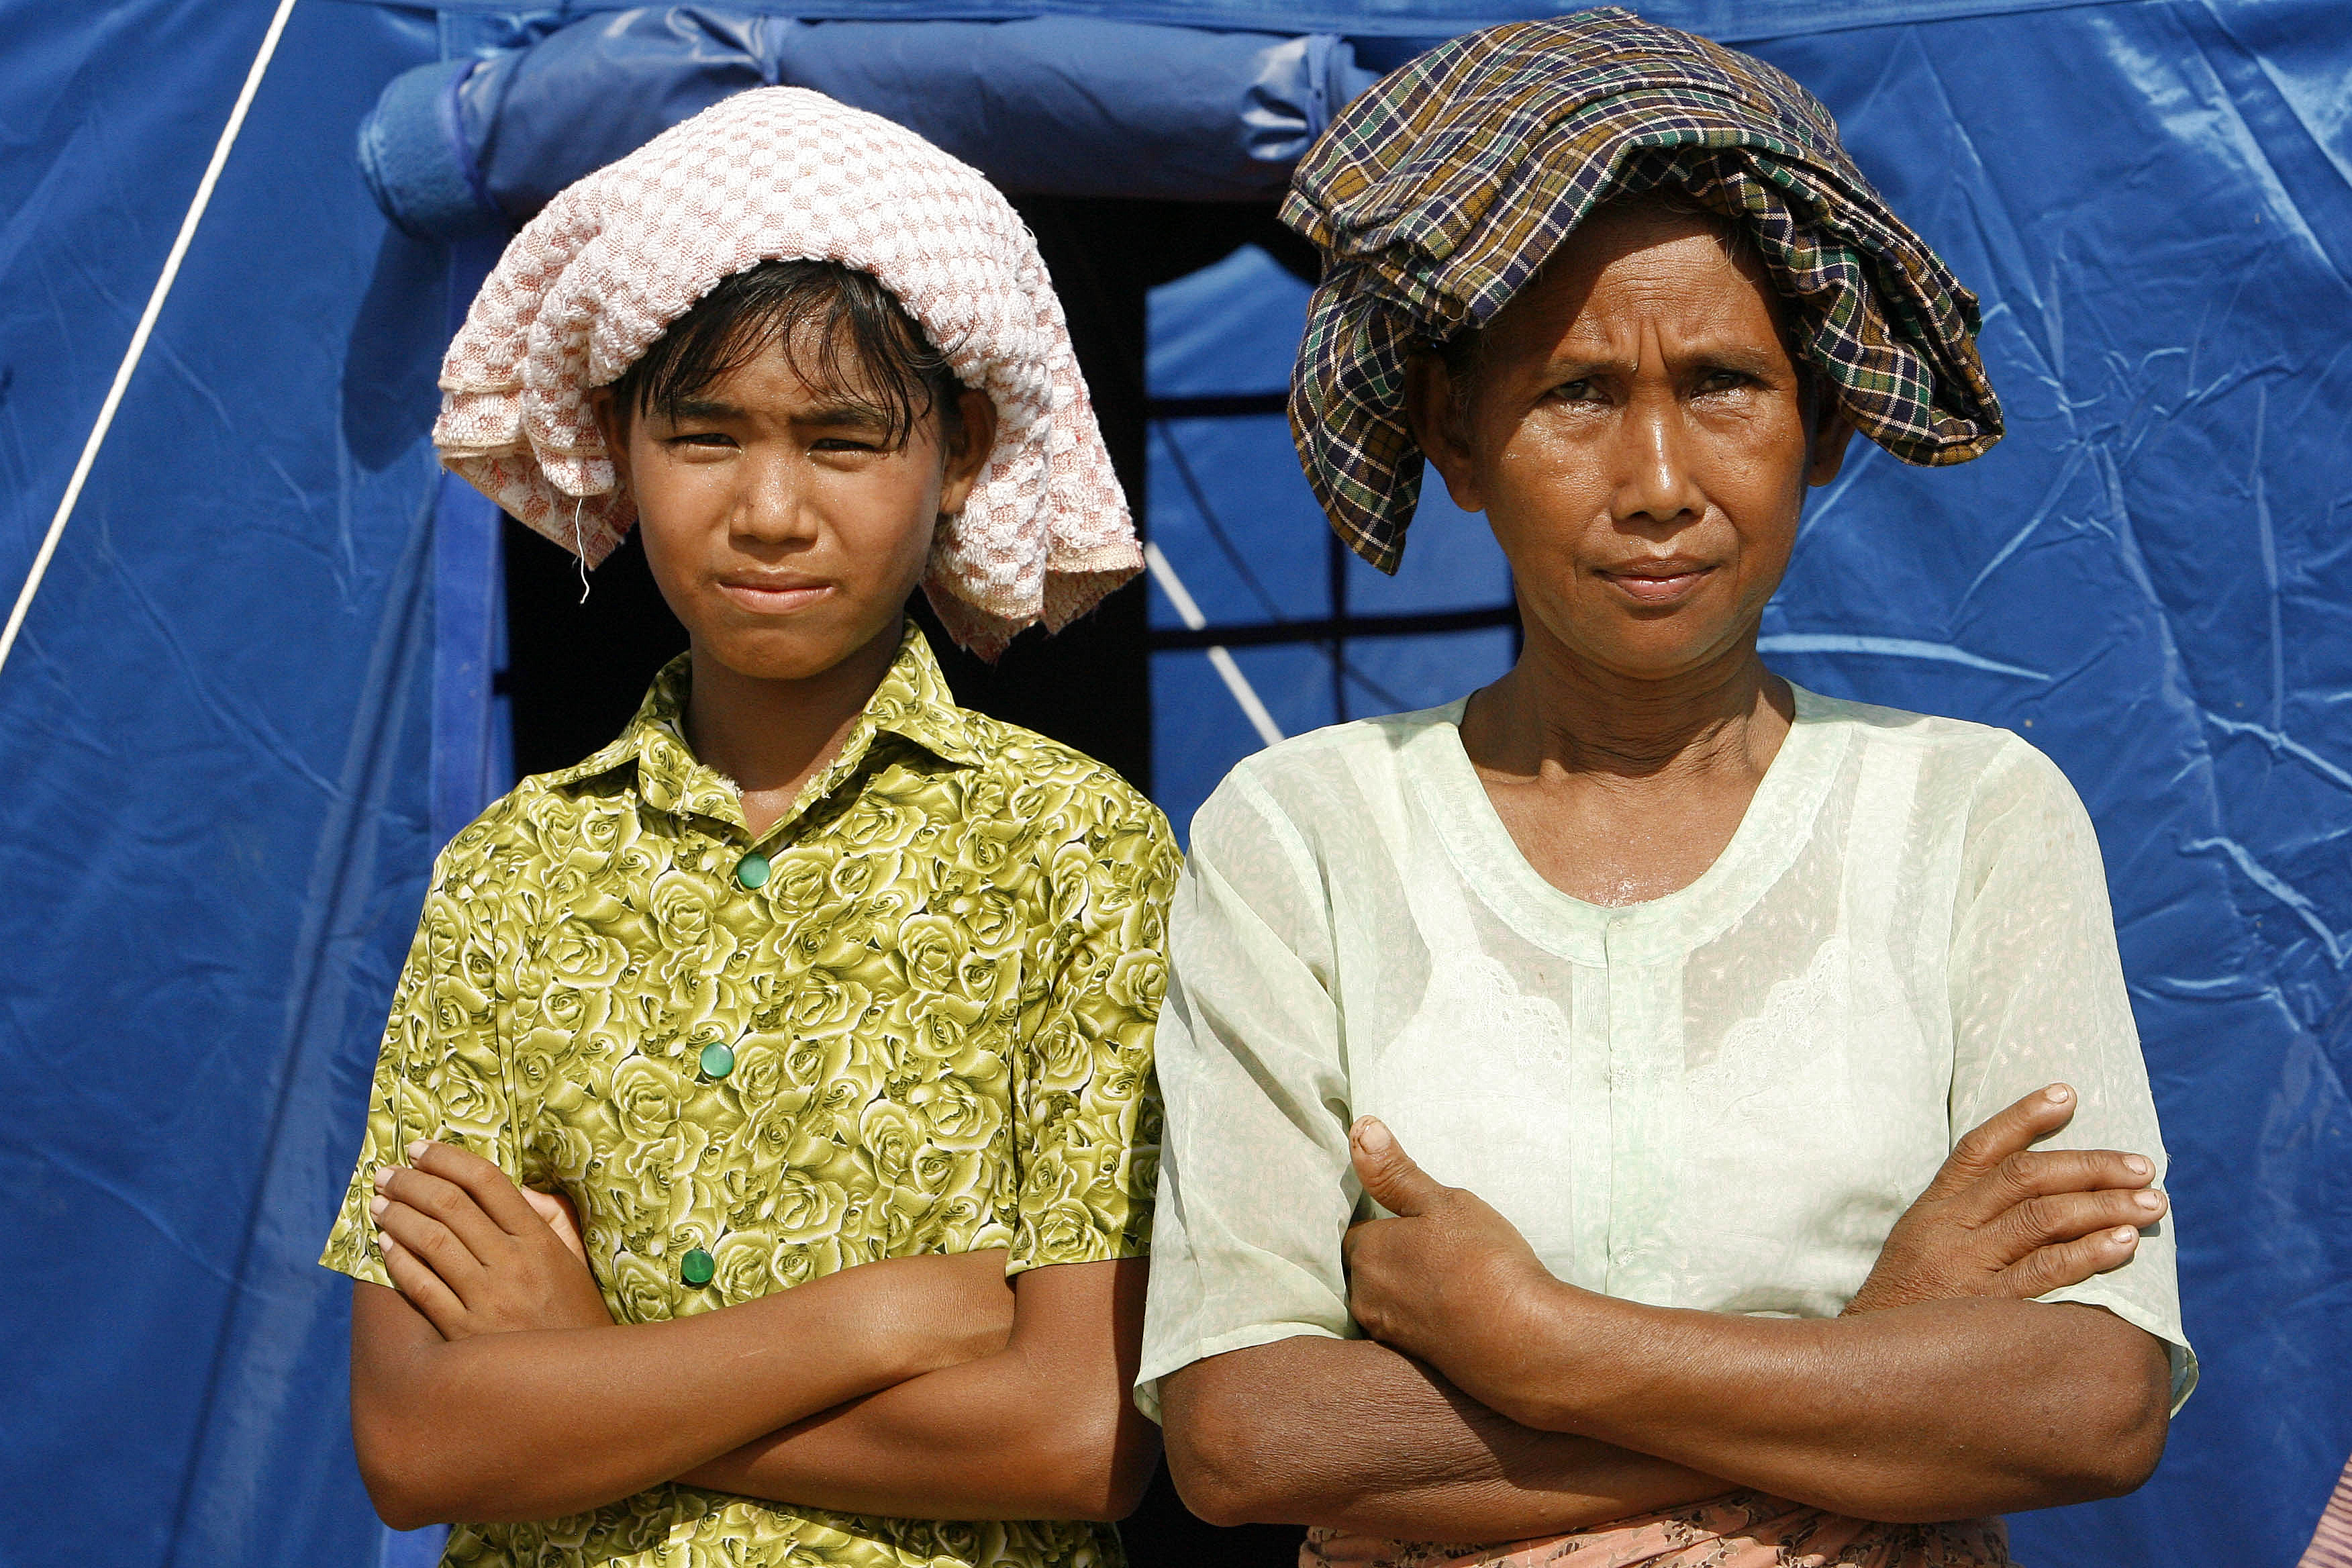 A girl and woman with fabric on their heads standing in front of a blue tent